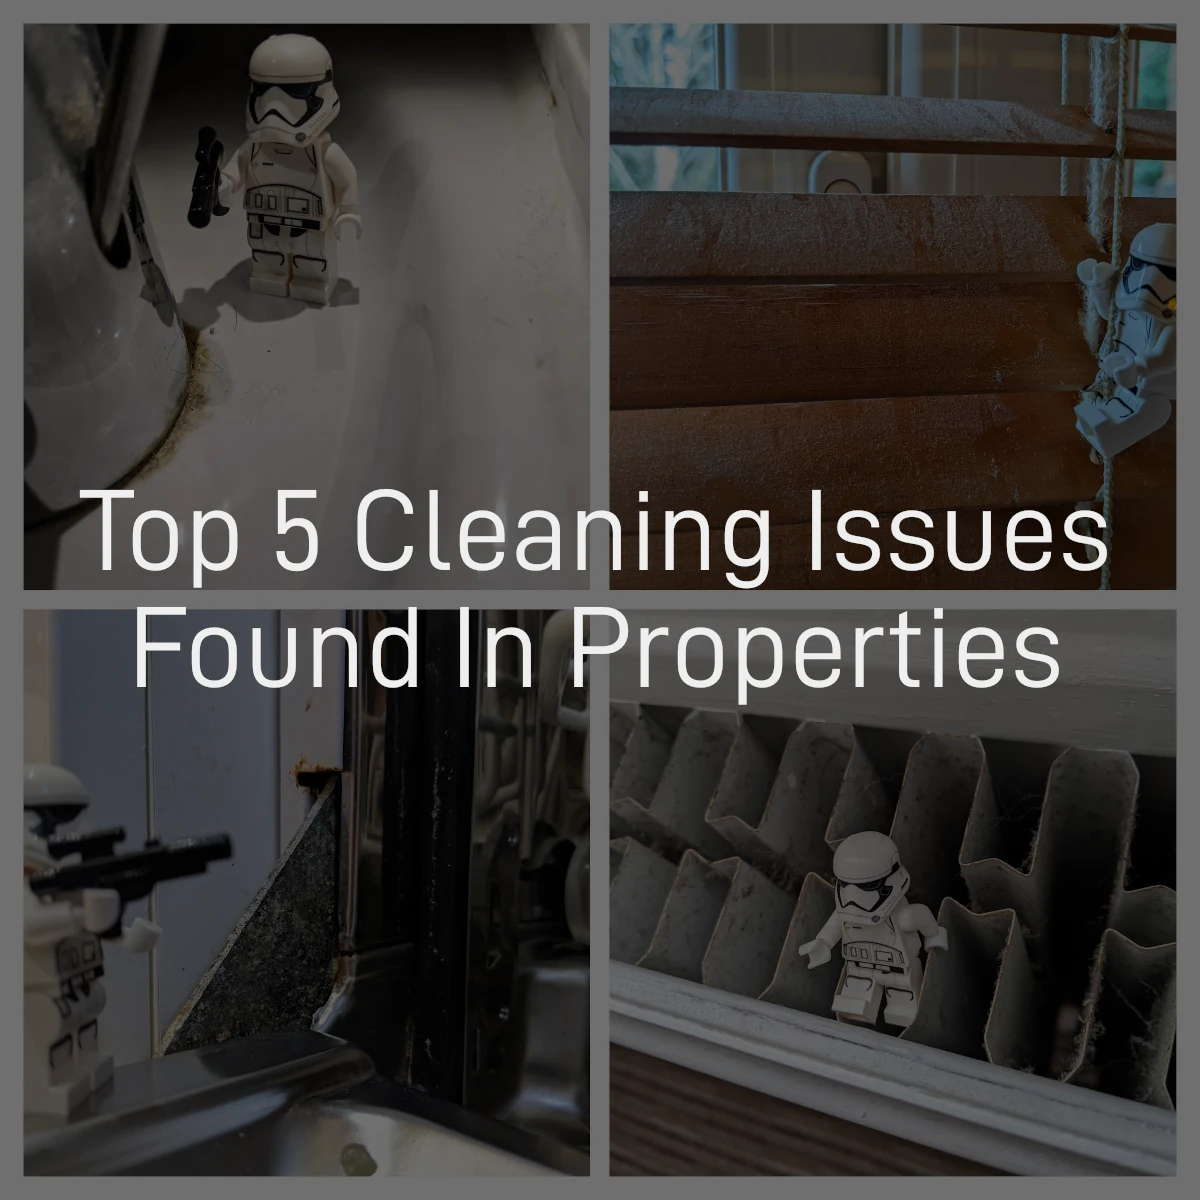 Top 5 Cleaning Issues Found In Properties